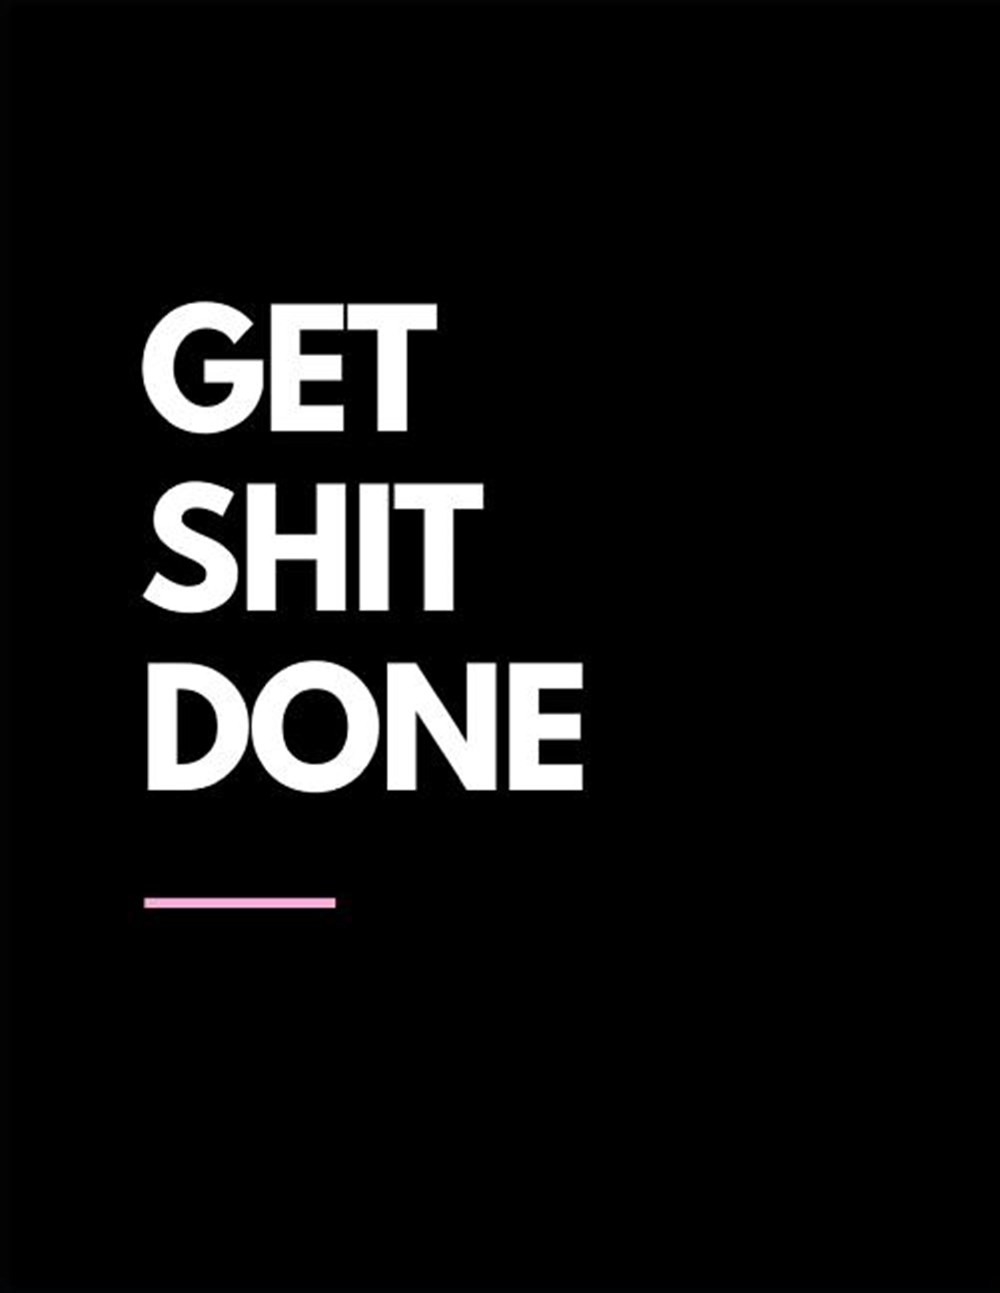 Get shit done 2019-2020 Weekly & Monthly View Planner, Organizer & Diary